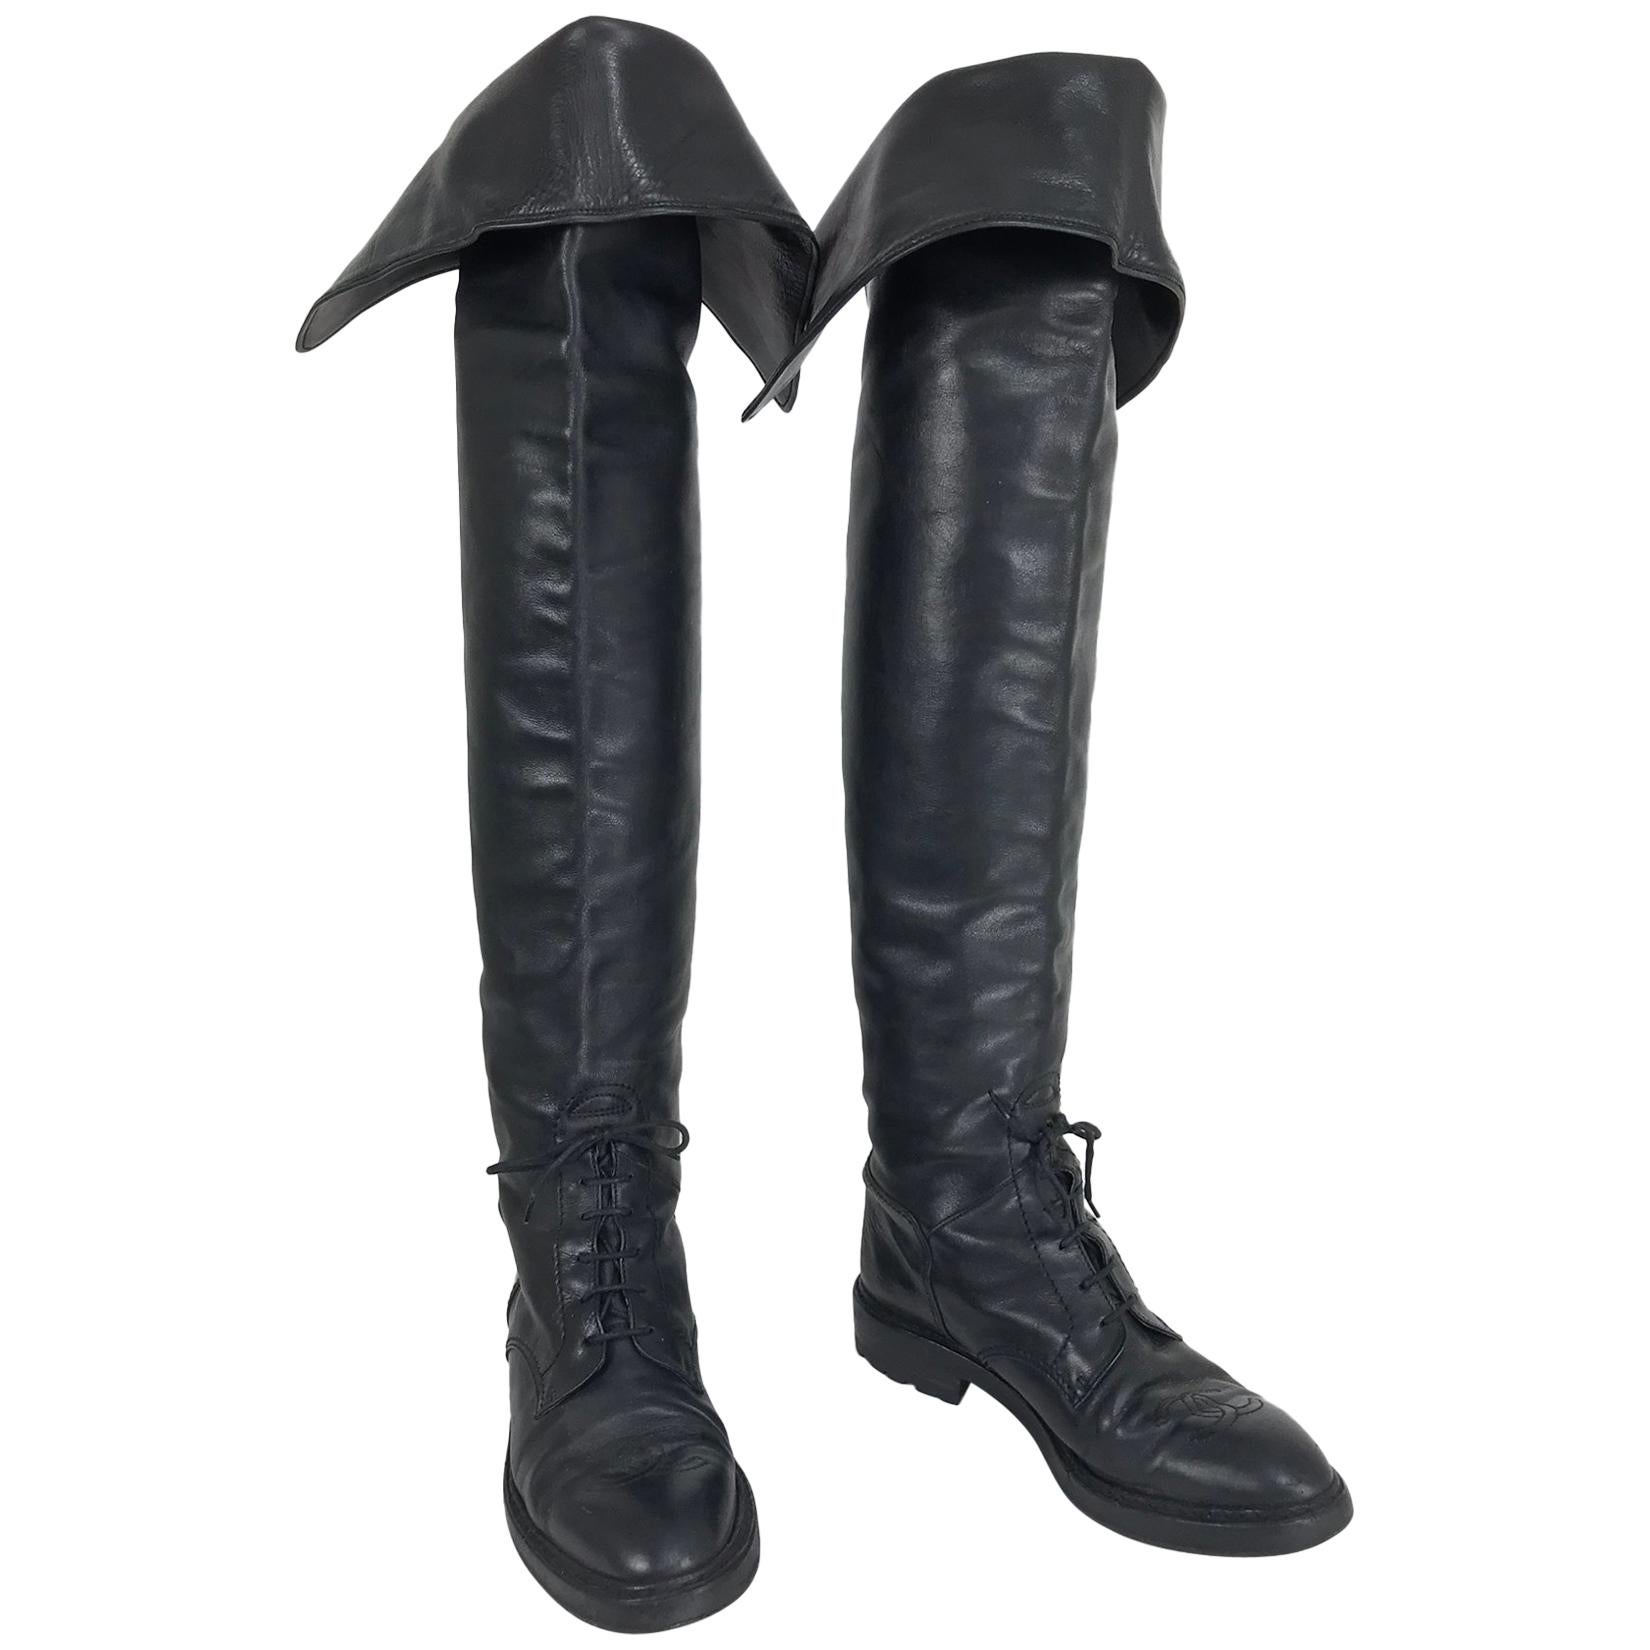 Chanel Over the knee black leather riding boots Claudia Schiffer worn 1990s